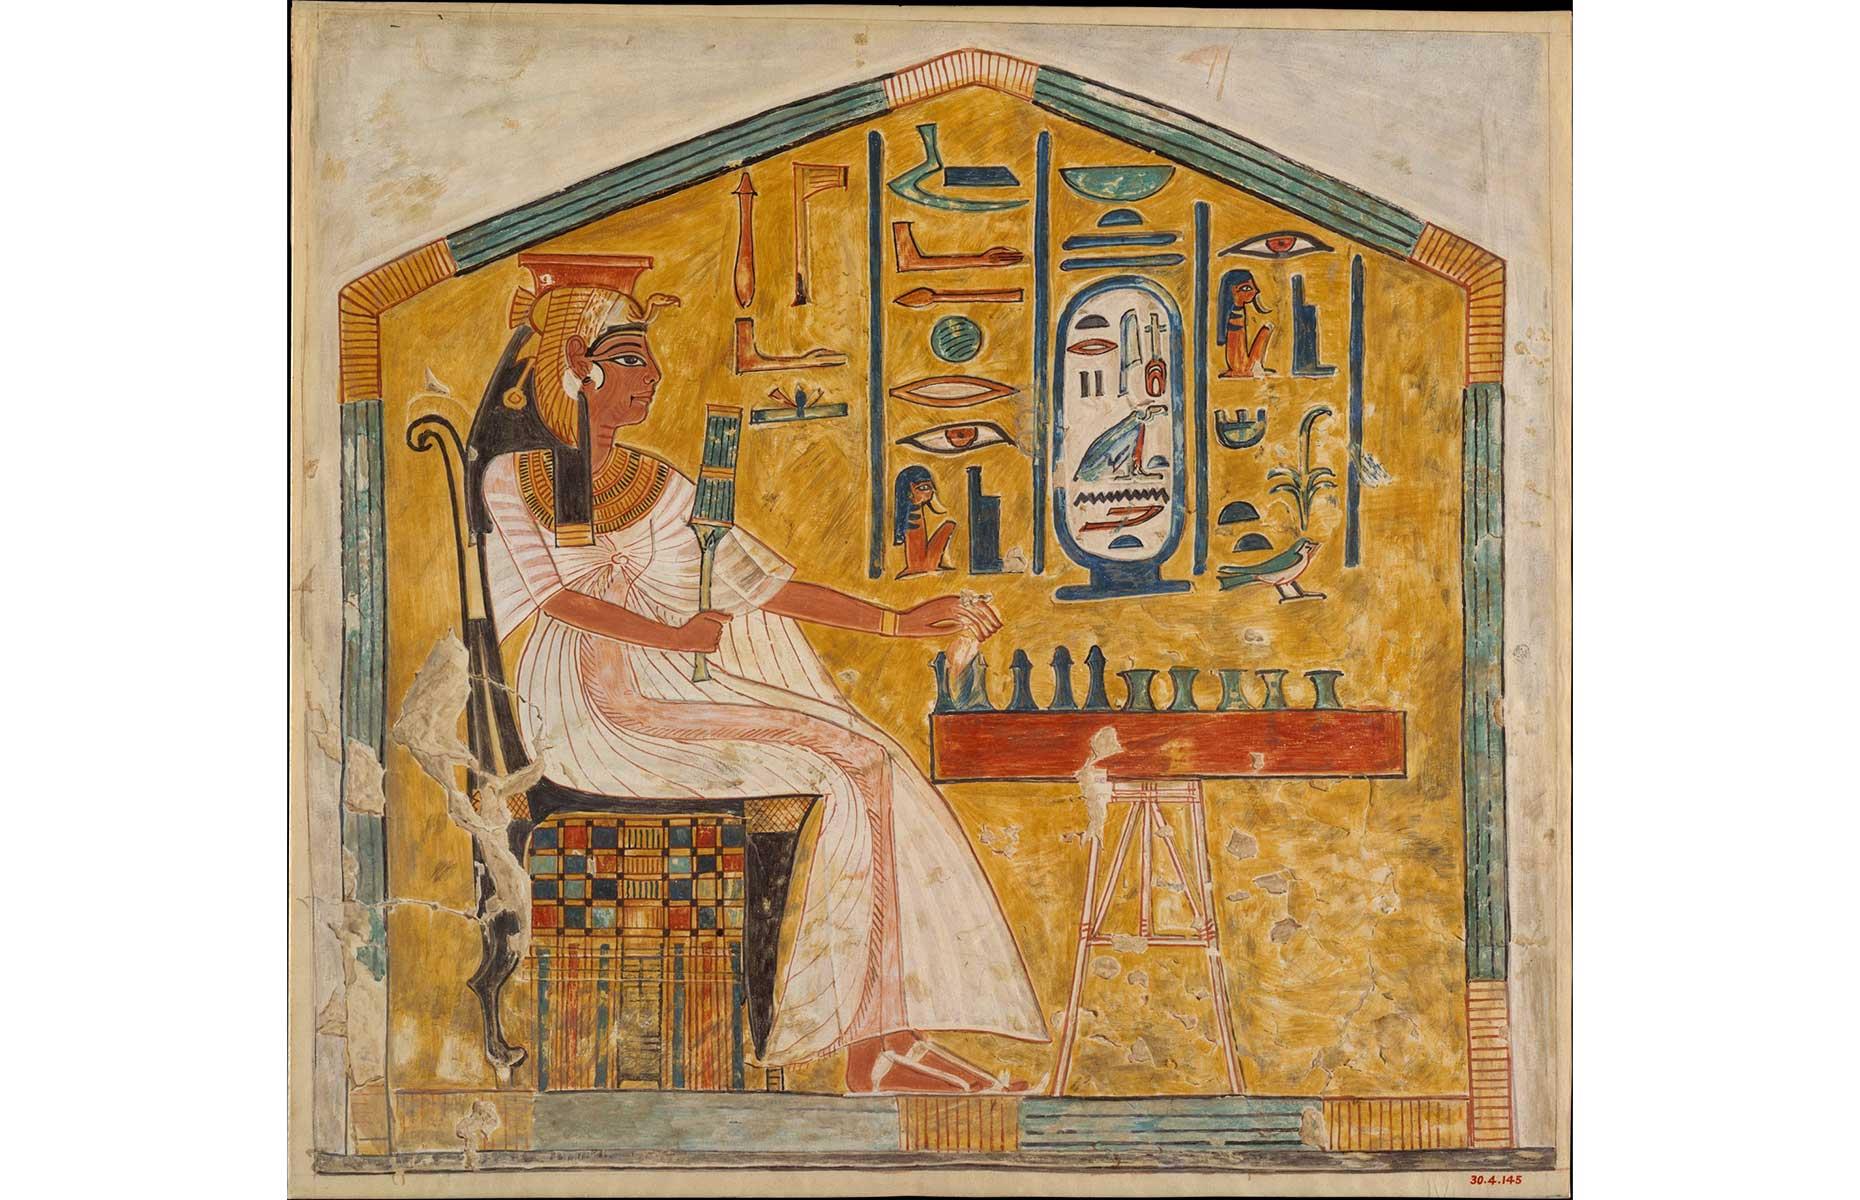 <p>This colourful painting of Queen Nefertari was found in her tomb in the Valley of the Queens in Luxor (ancient Thebes). The royal lady was buried in a small rock-cut temple and is depicted here playing a <a href="https://www.metmuseum.org/art/collection/search/548355">popular ancient Egyptian game called senet</a>. The game has symbolic meaning; senet meant 'passing', and it was seen as a parallel for the journey into the afterlife.</p>